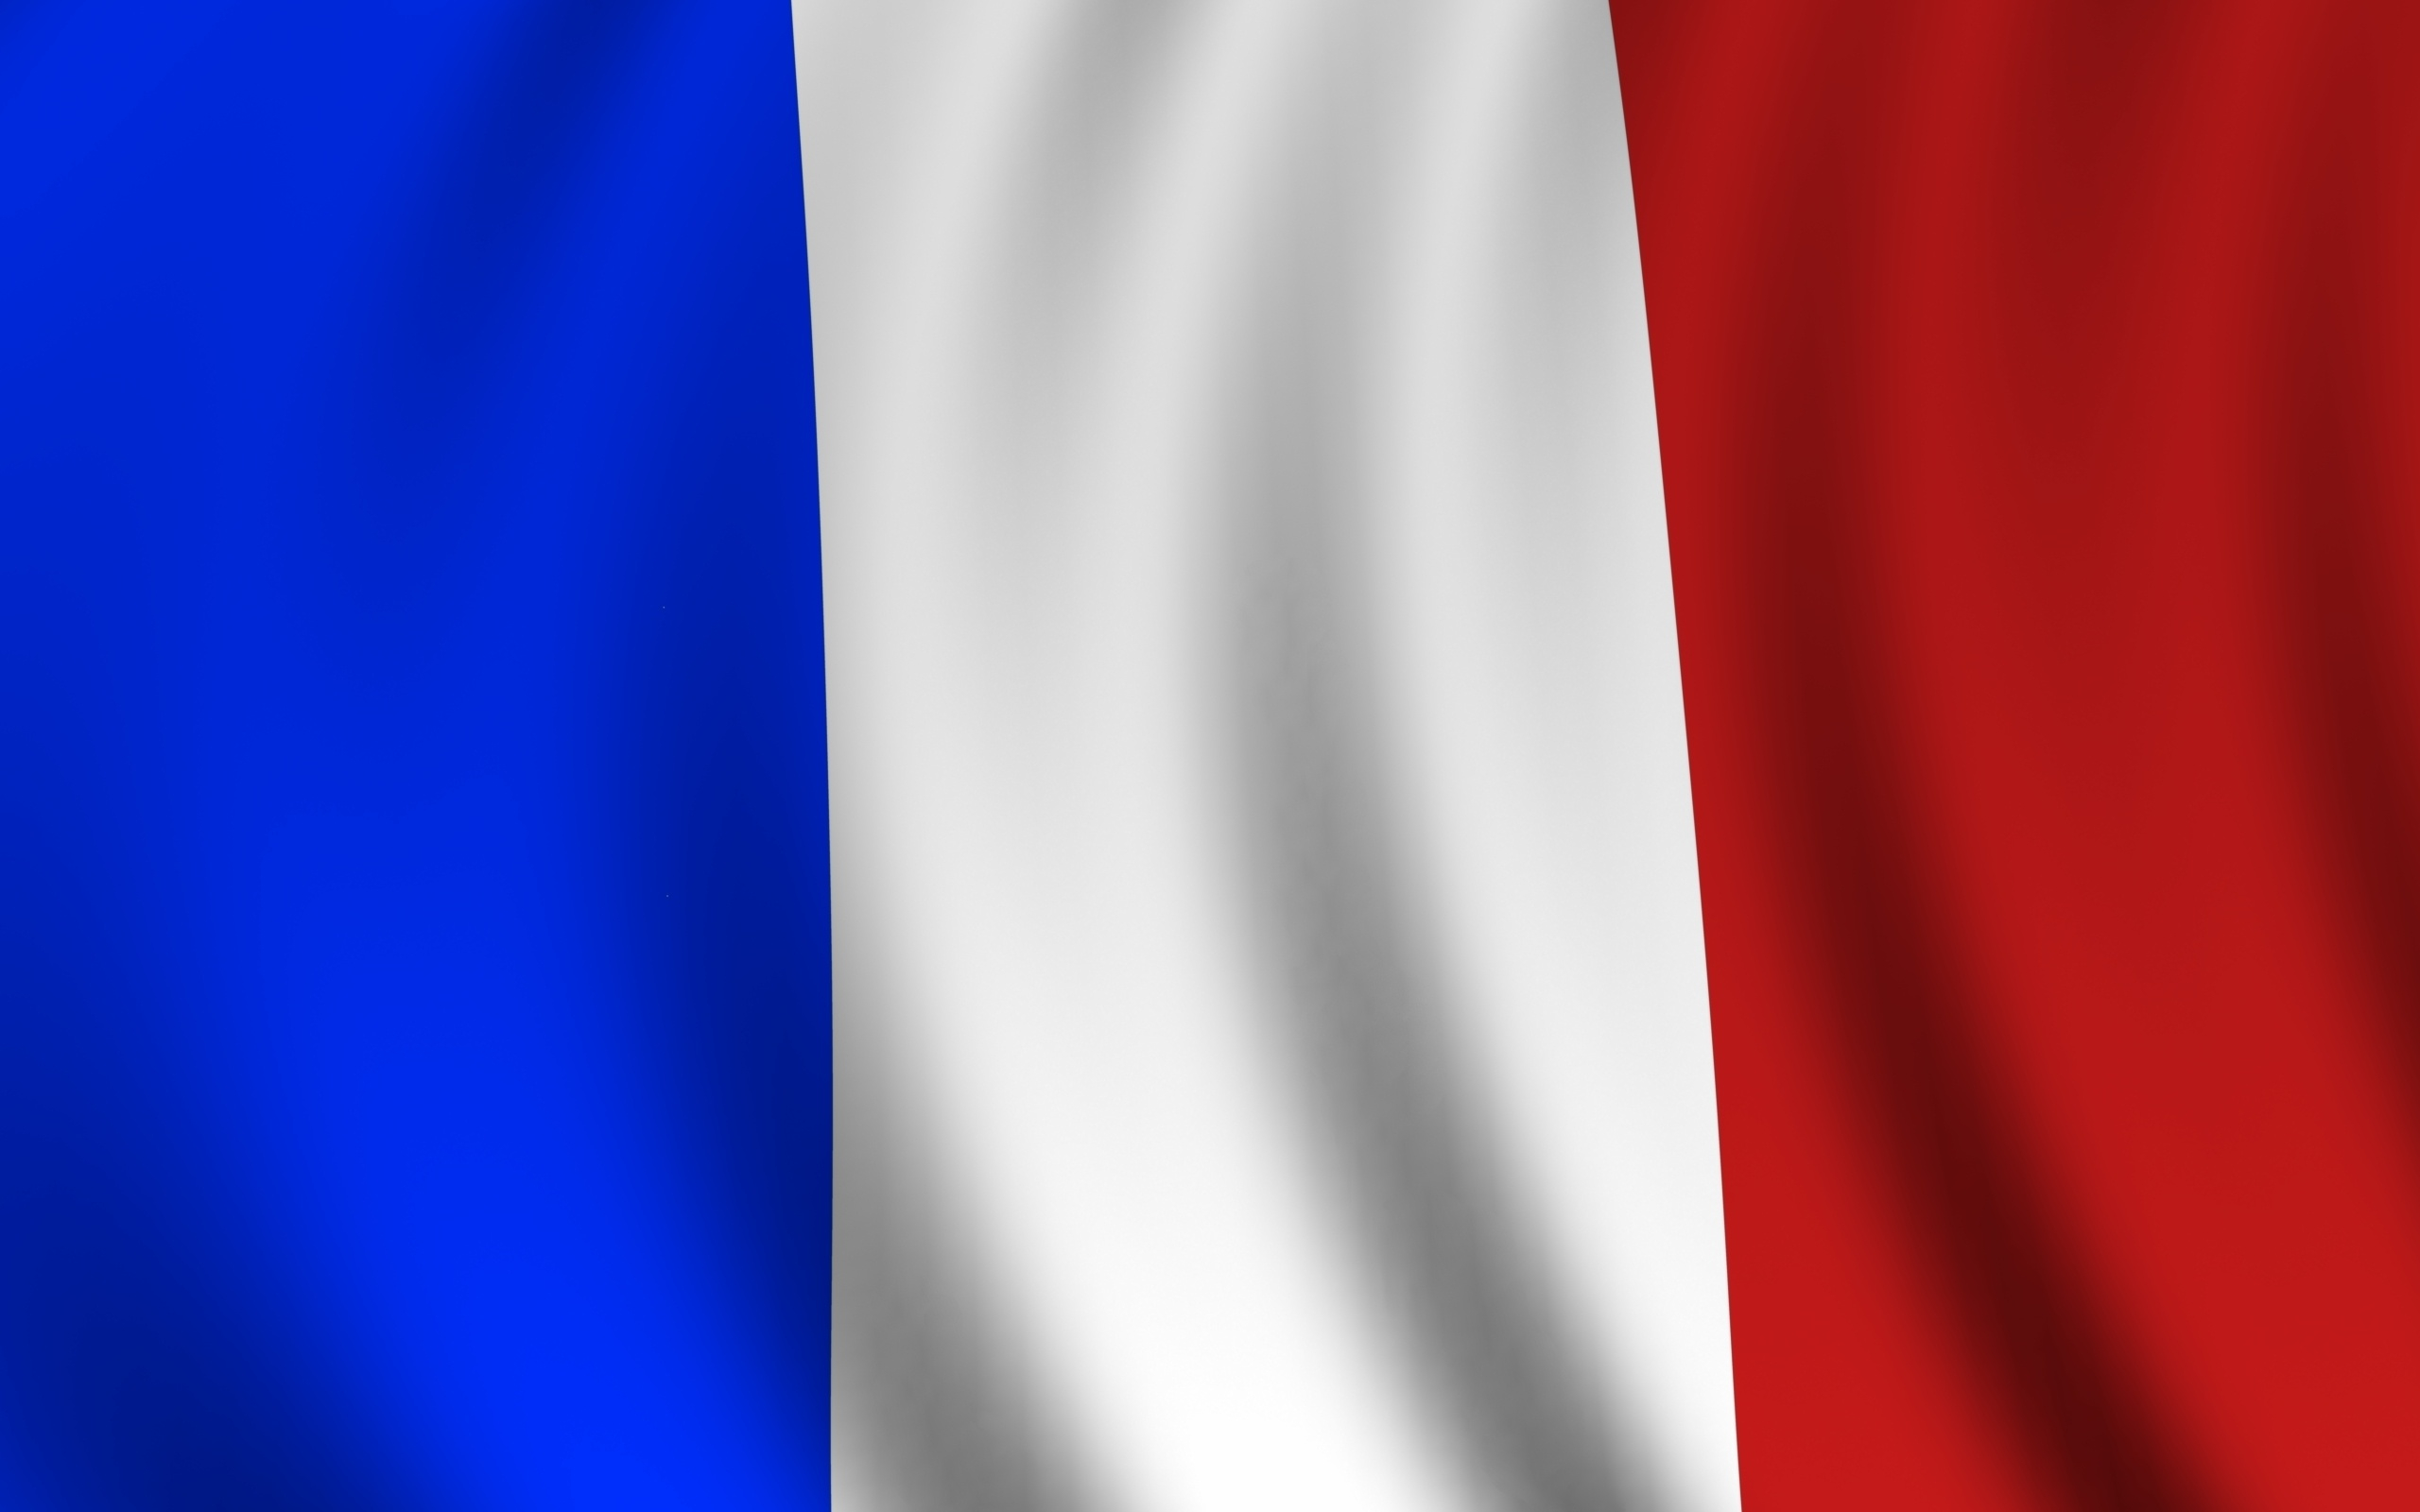 2560x1600 Free French Flag Images, Download Free French Flag Images png images, Free ClipArts on Clipart Library